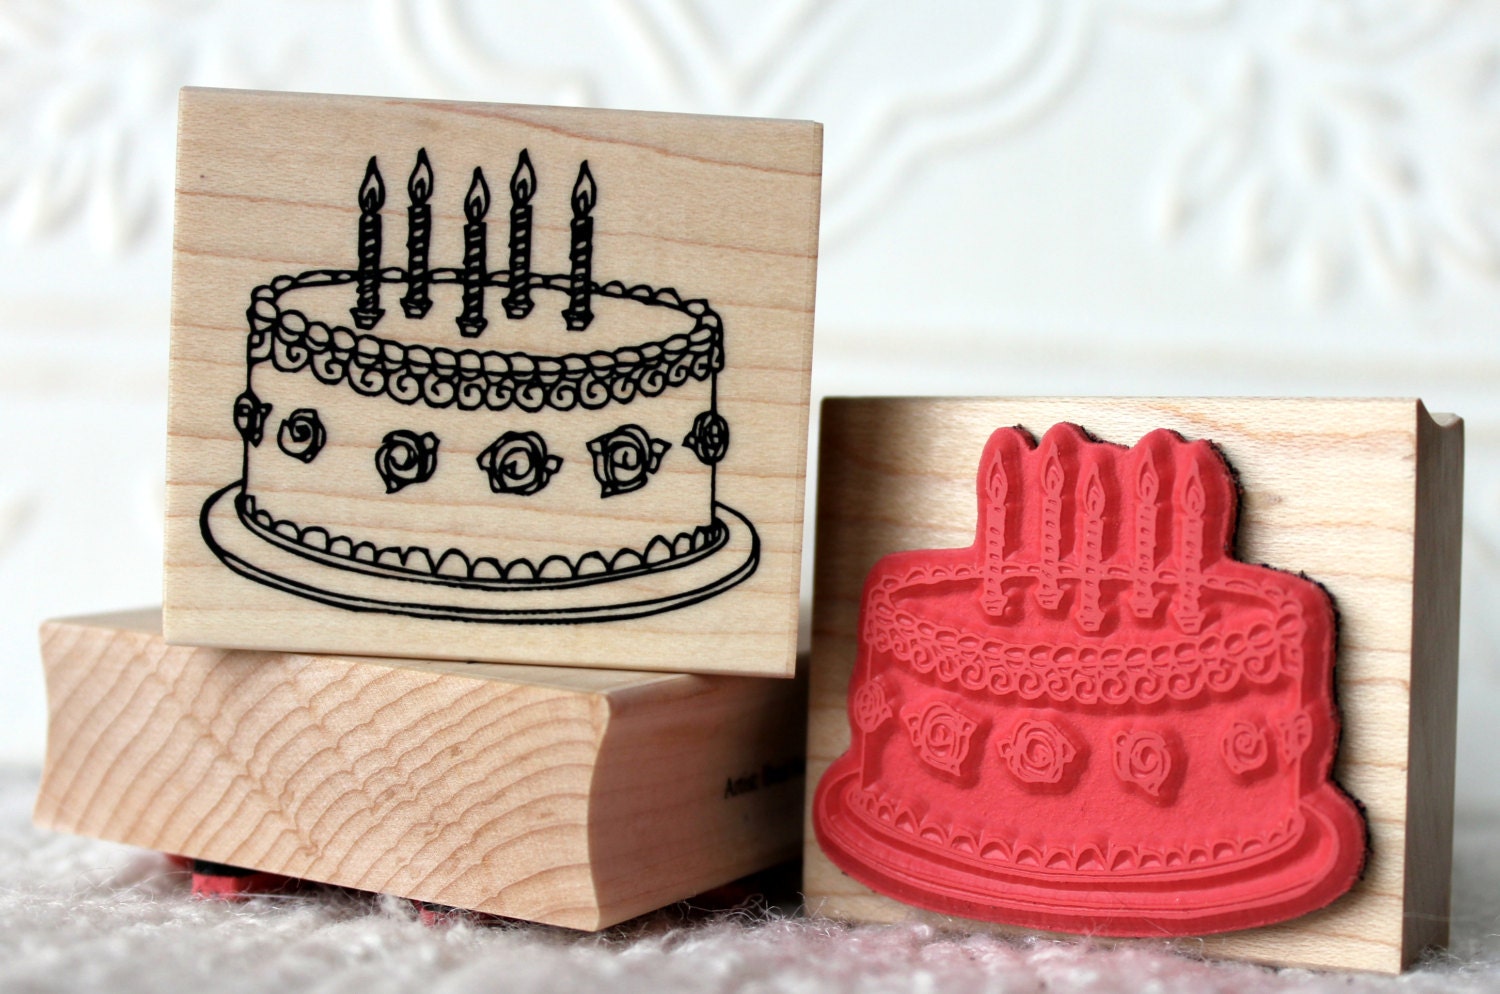 Rubber stamp HAPPY BIRTHDAY ∅ 40 mm / 1.57 inches